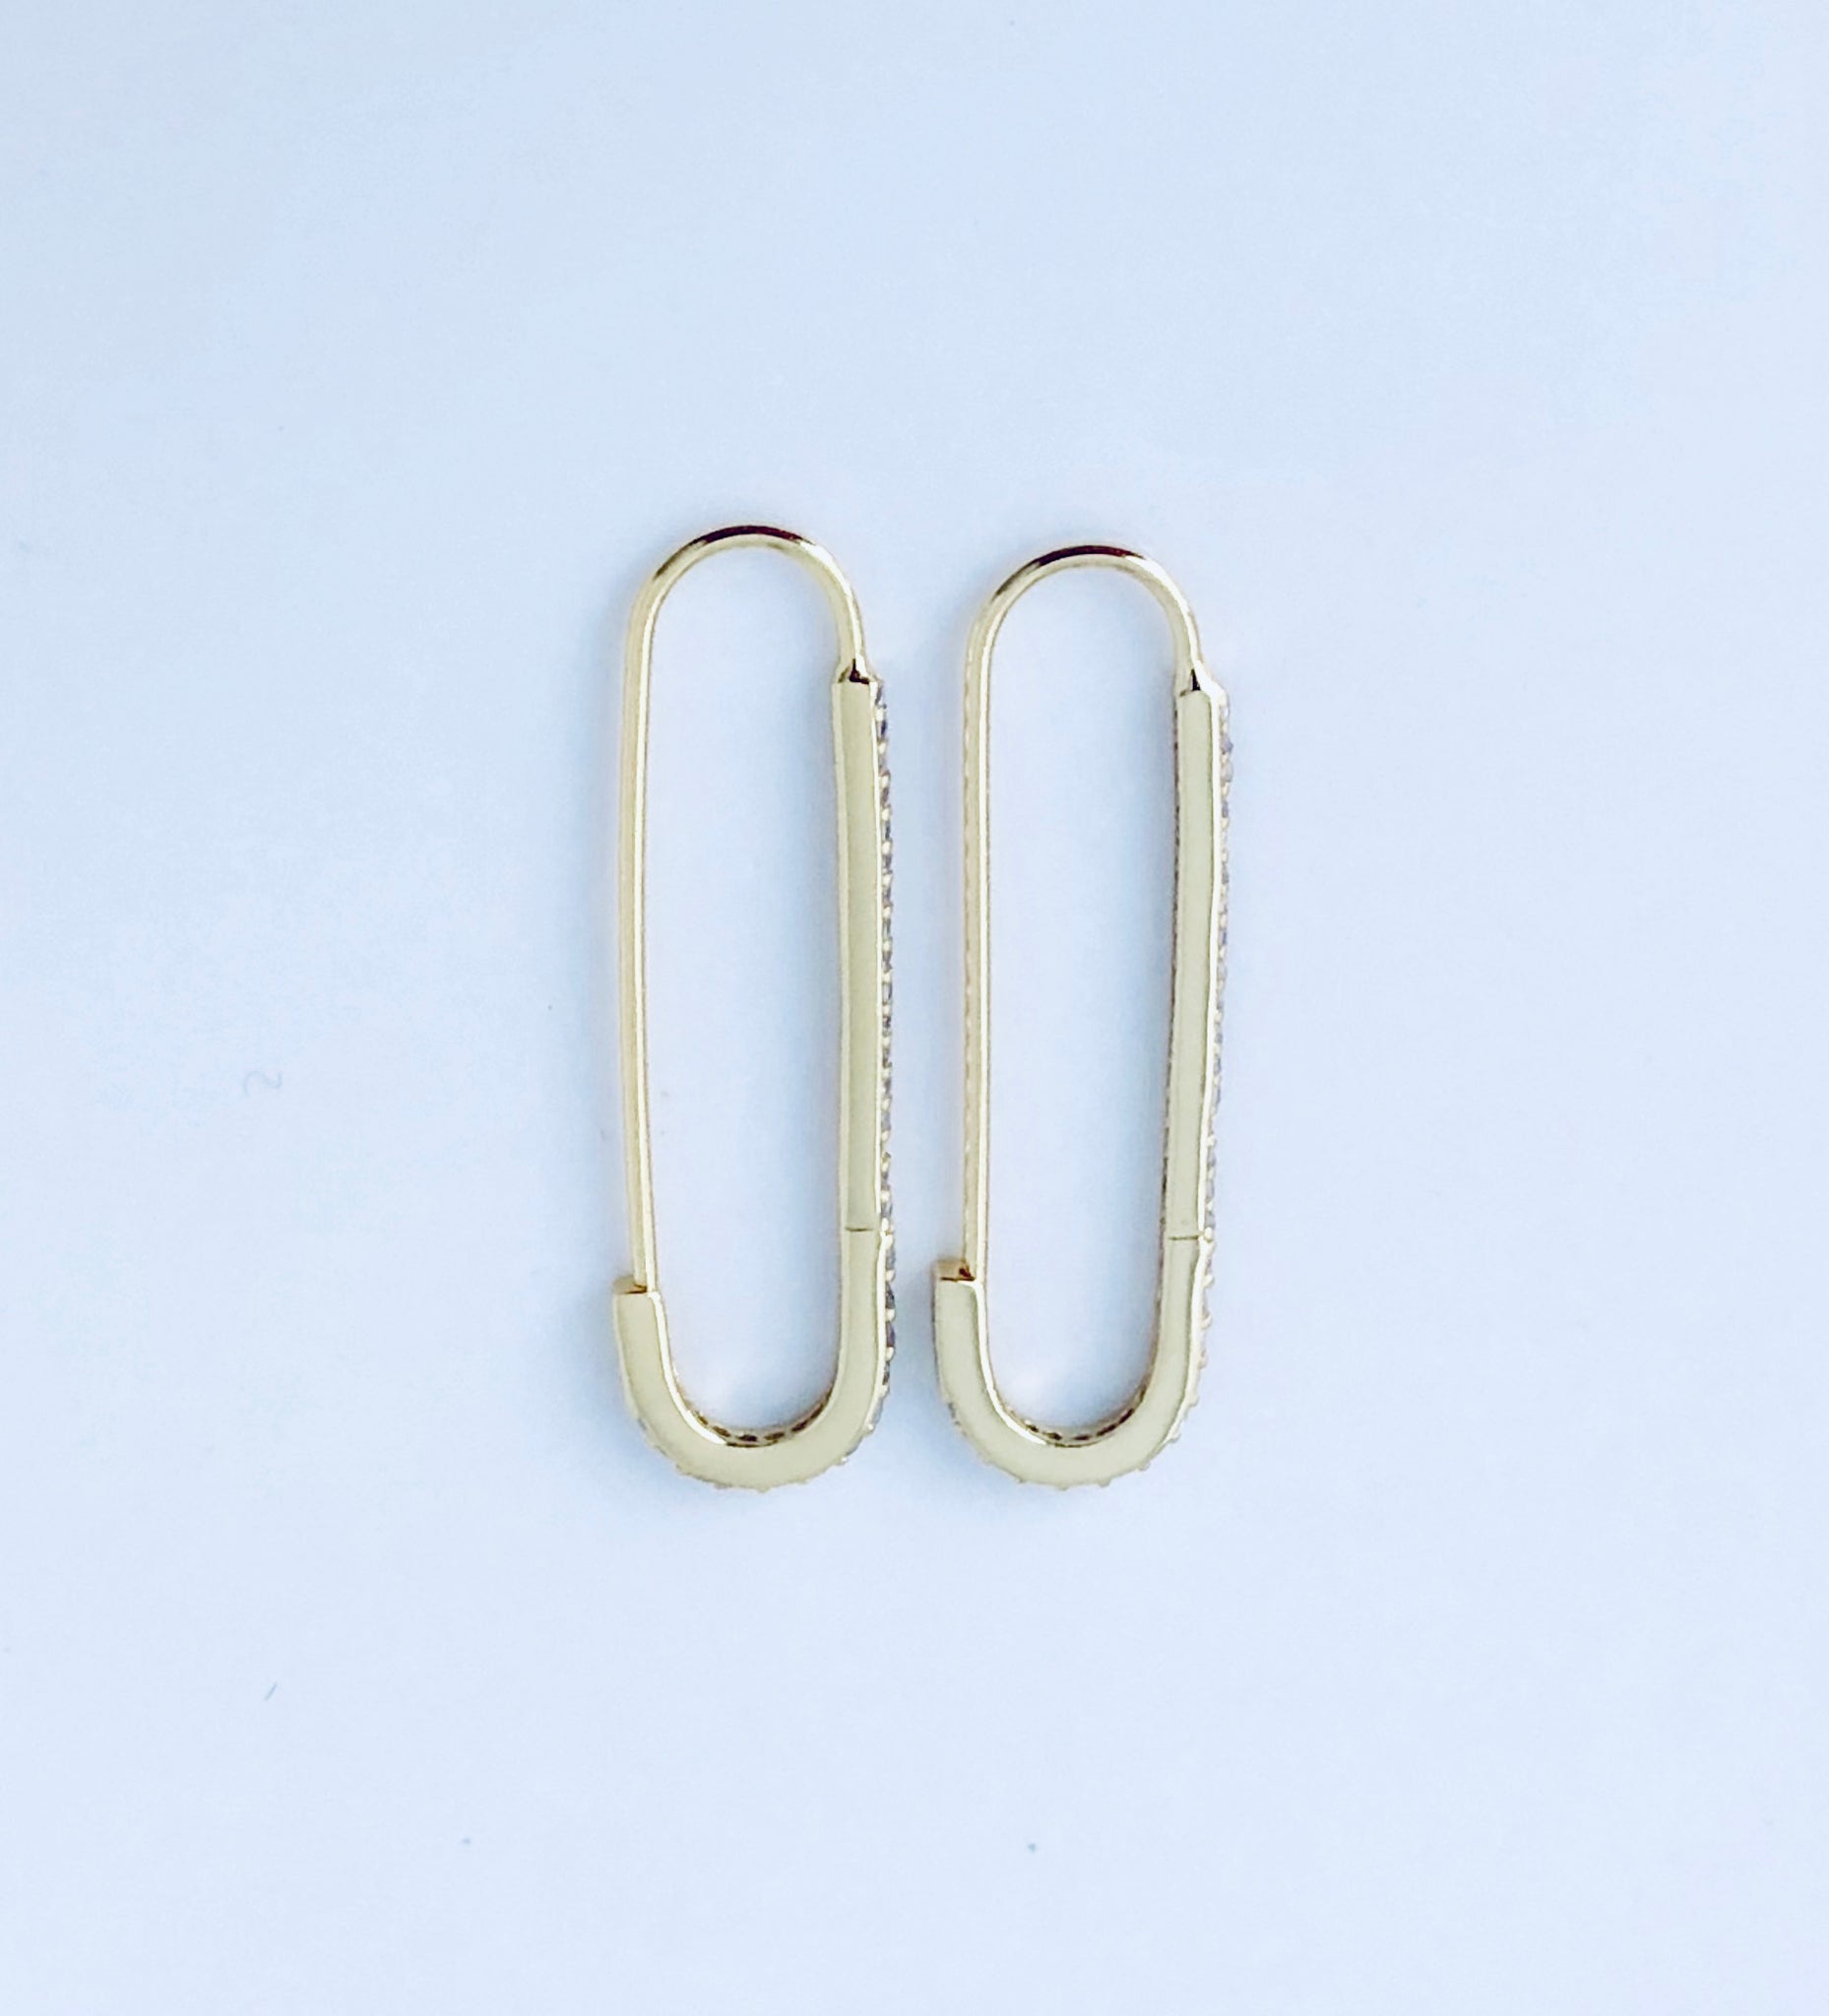 Pins / Blue Large Safety Pins 